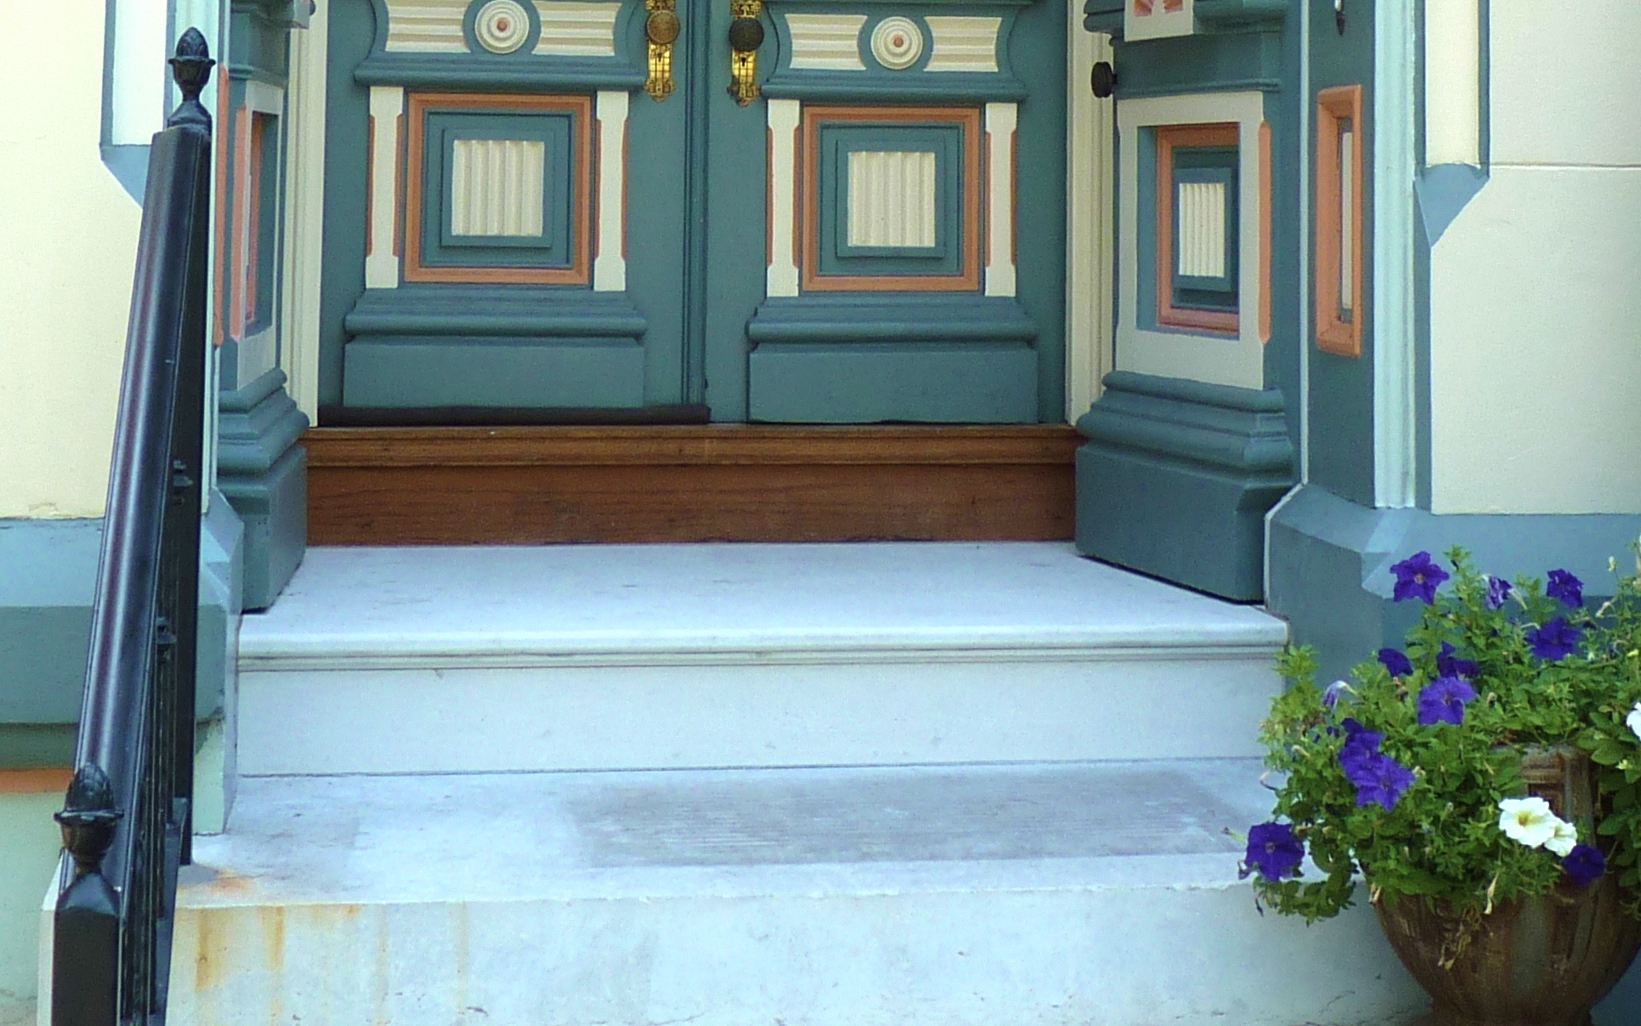 Marble Porch Repaired - Lafayette Square Neighborhood, Saint Louis, MO - Stone Works - Lee Lindsey